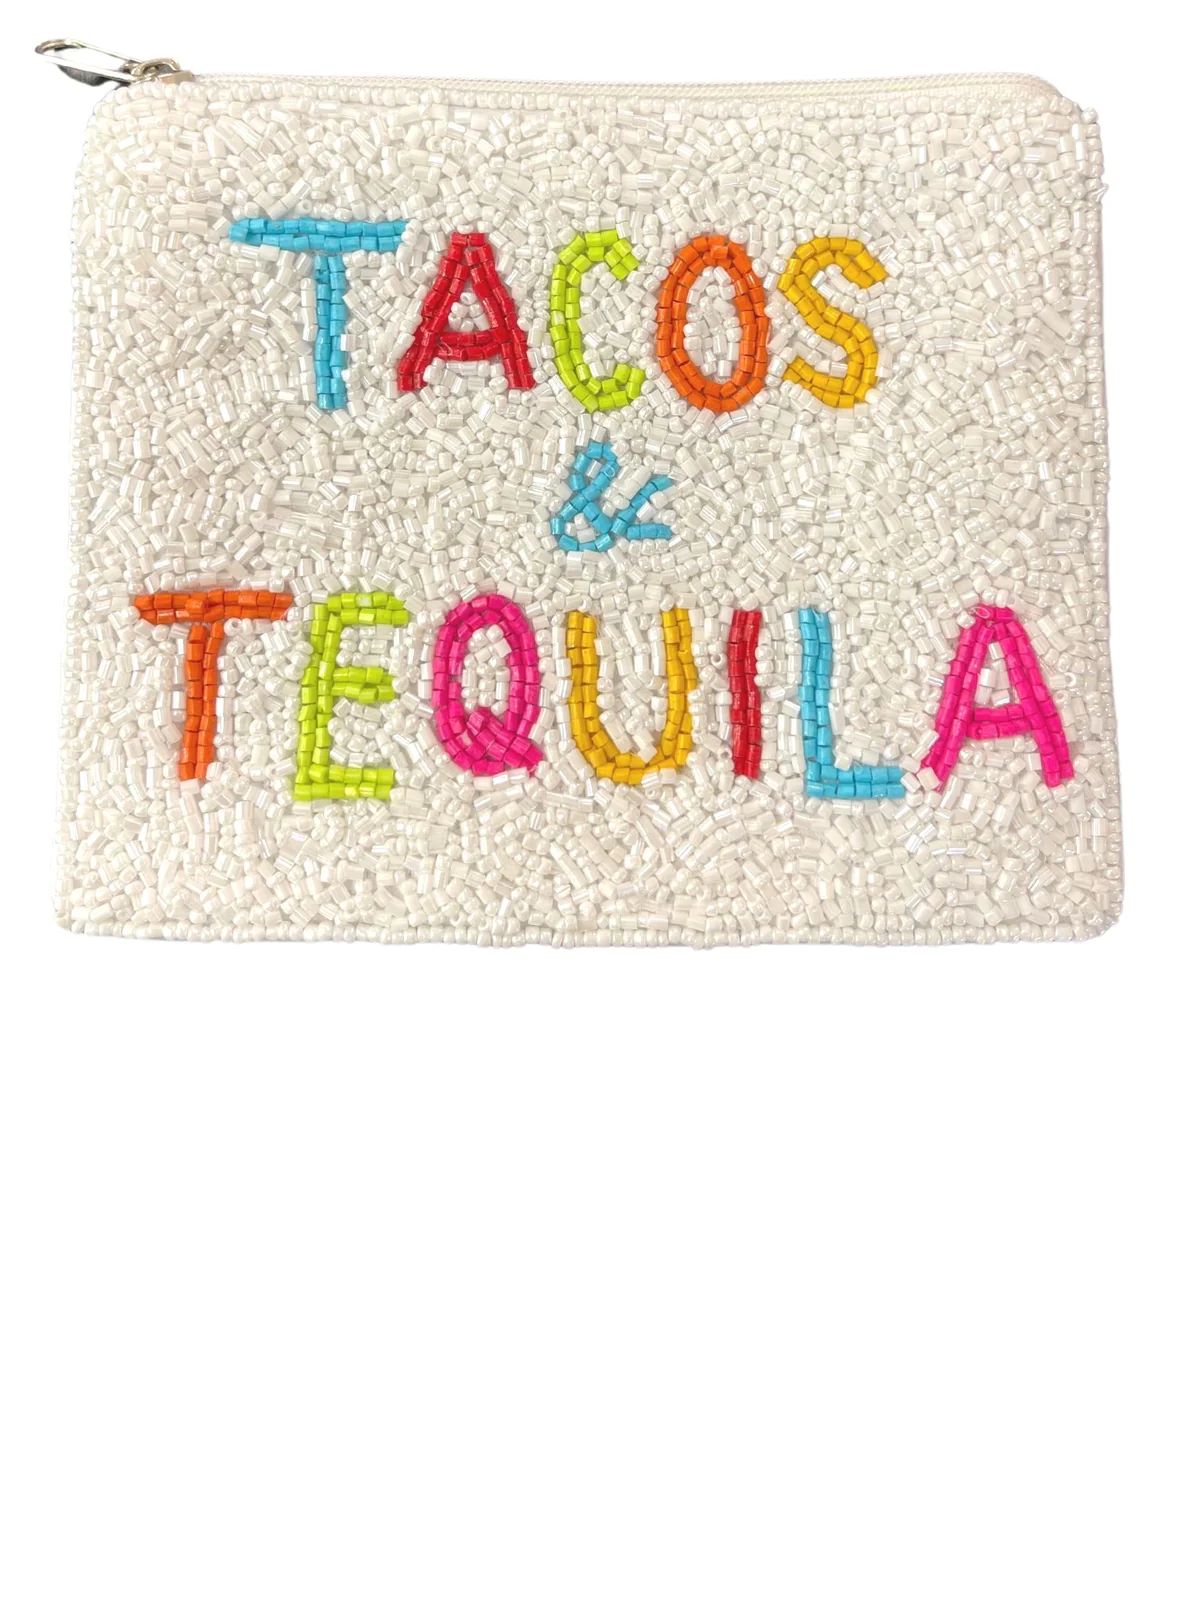 TACOS AND TEQUILA CLUTCH | Judith March